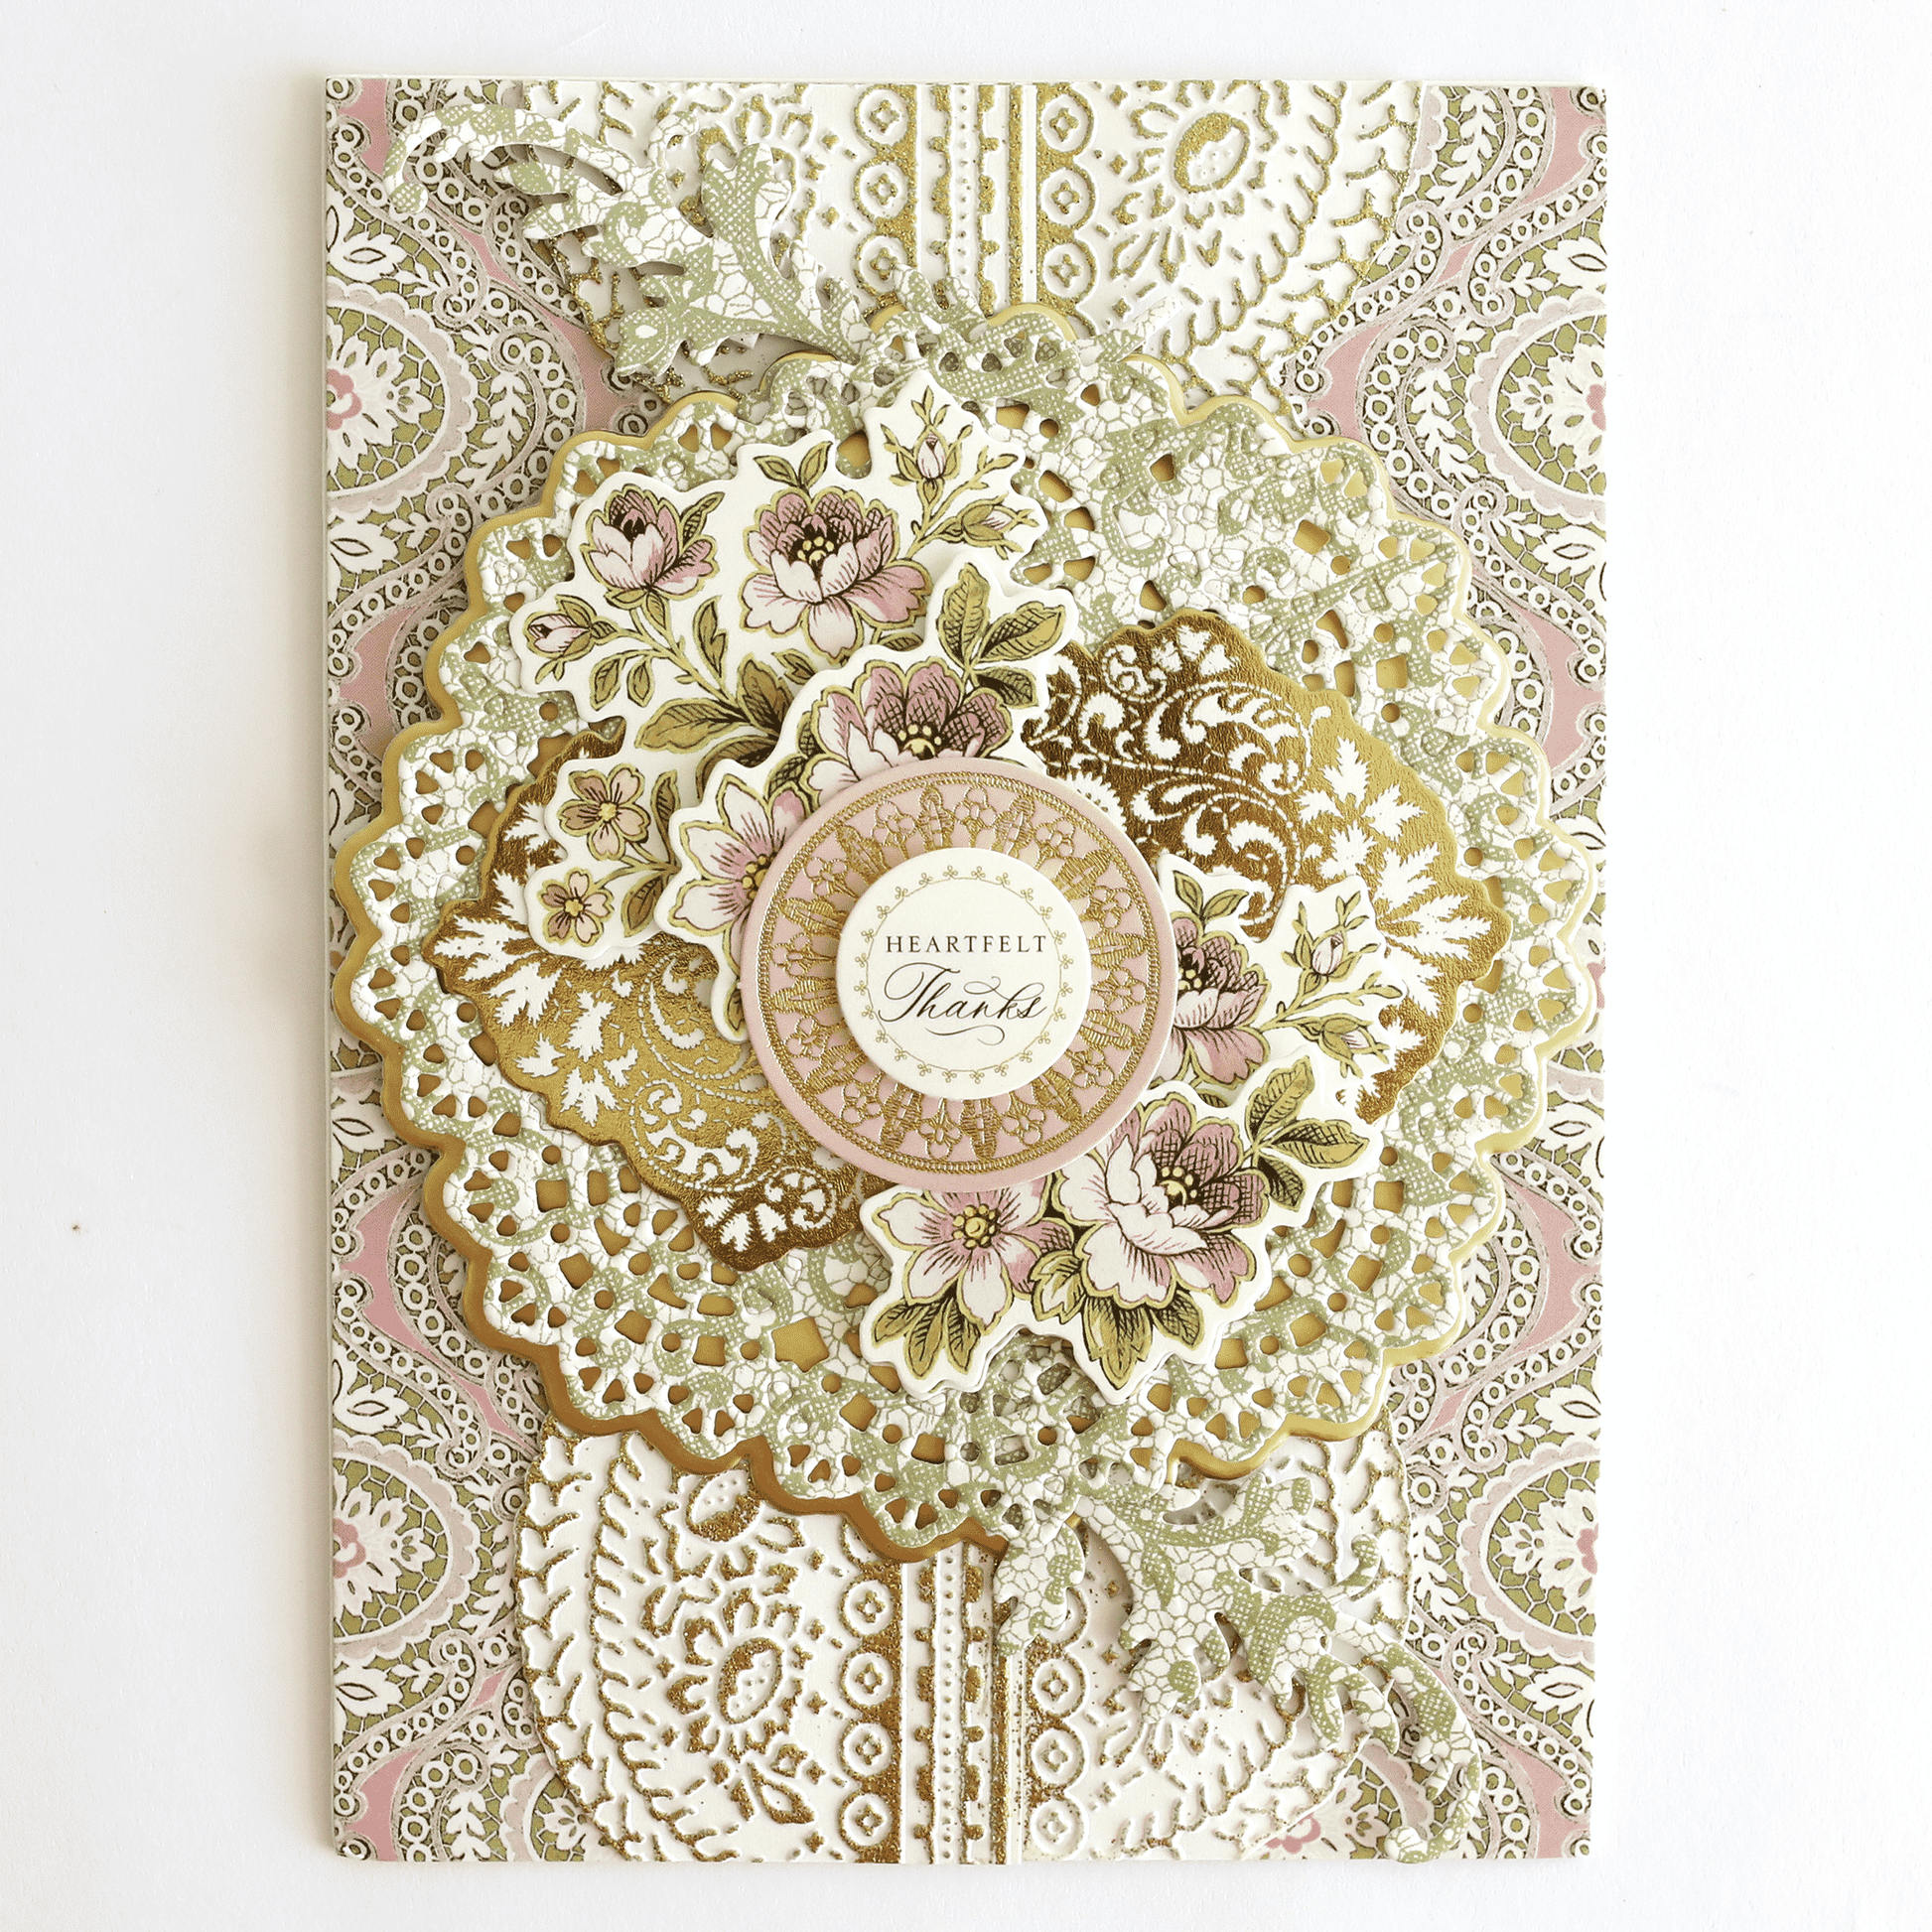 a card with a floral design on it.